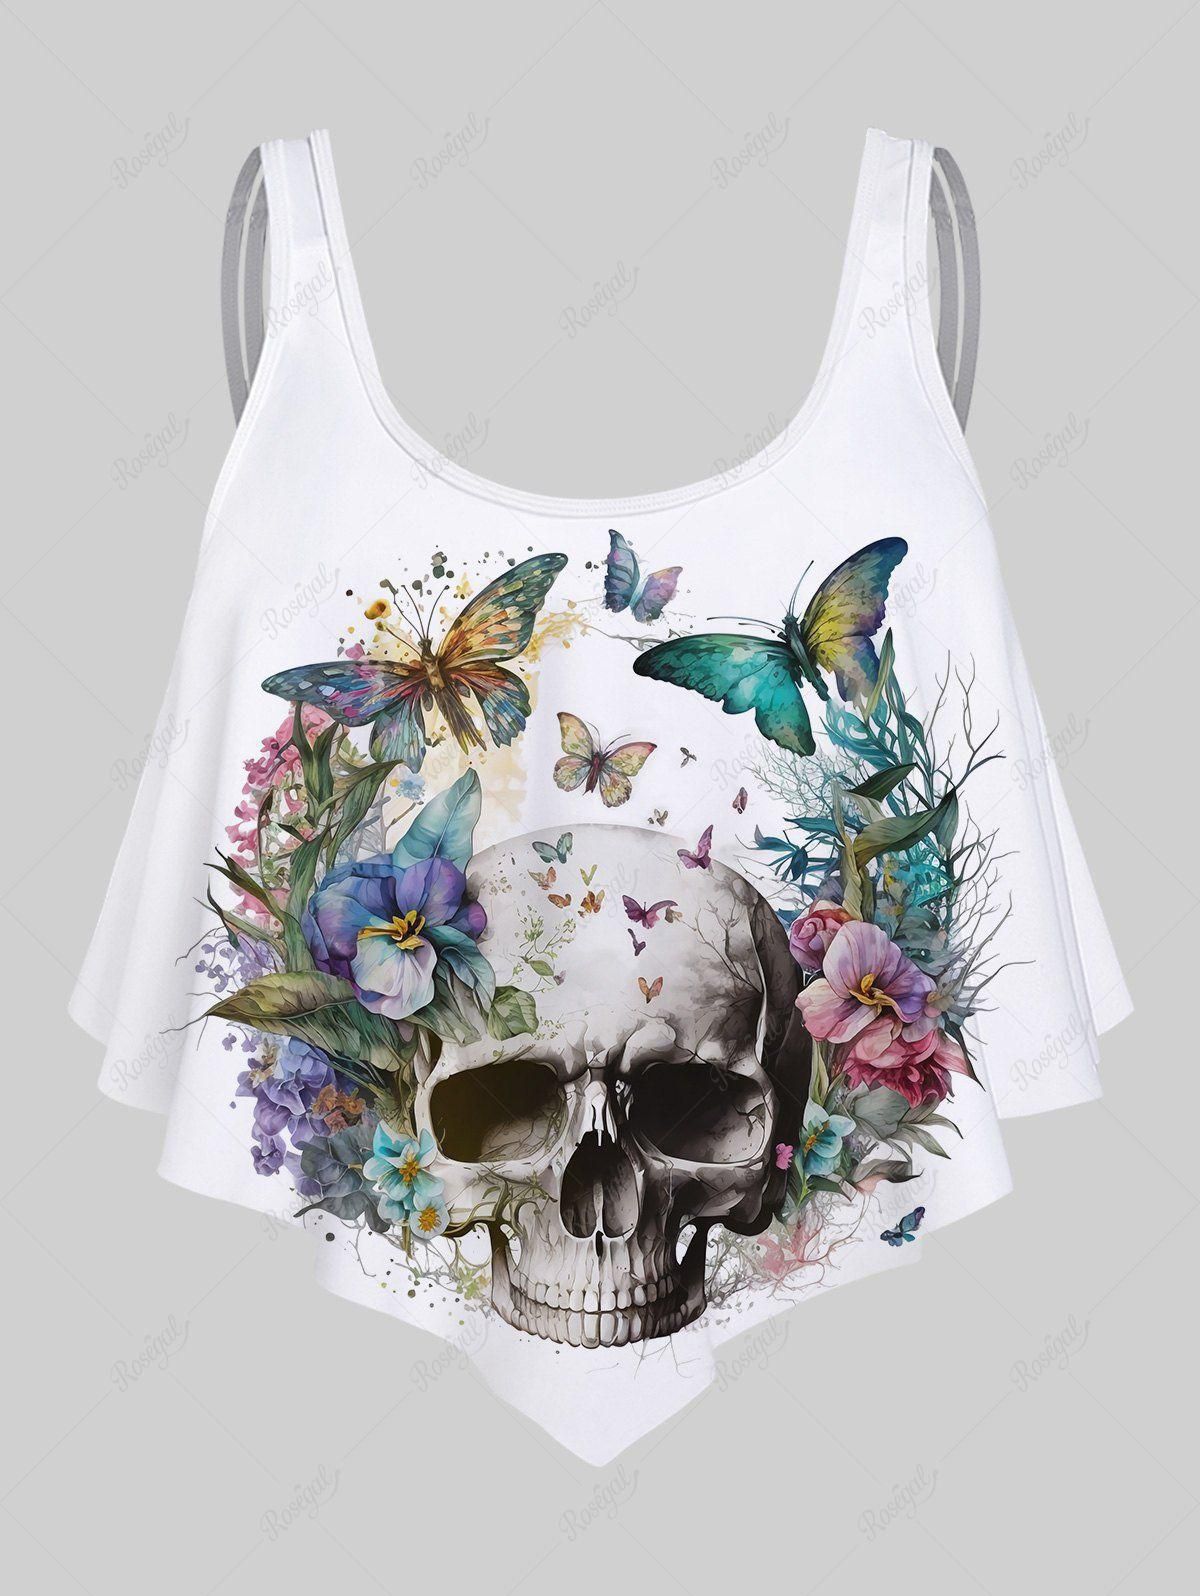 Gothic Flower Skull Butterfly Print Tankini Top (Adjustable Shoulder Strap) - 5x